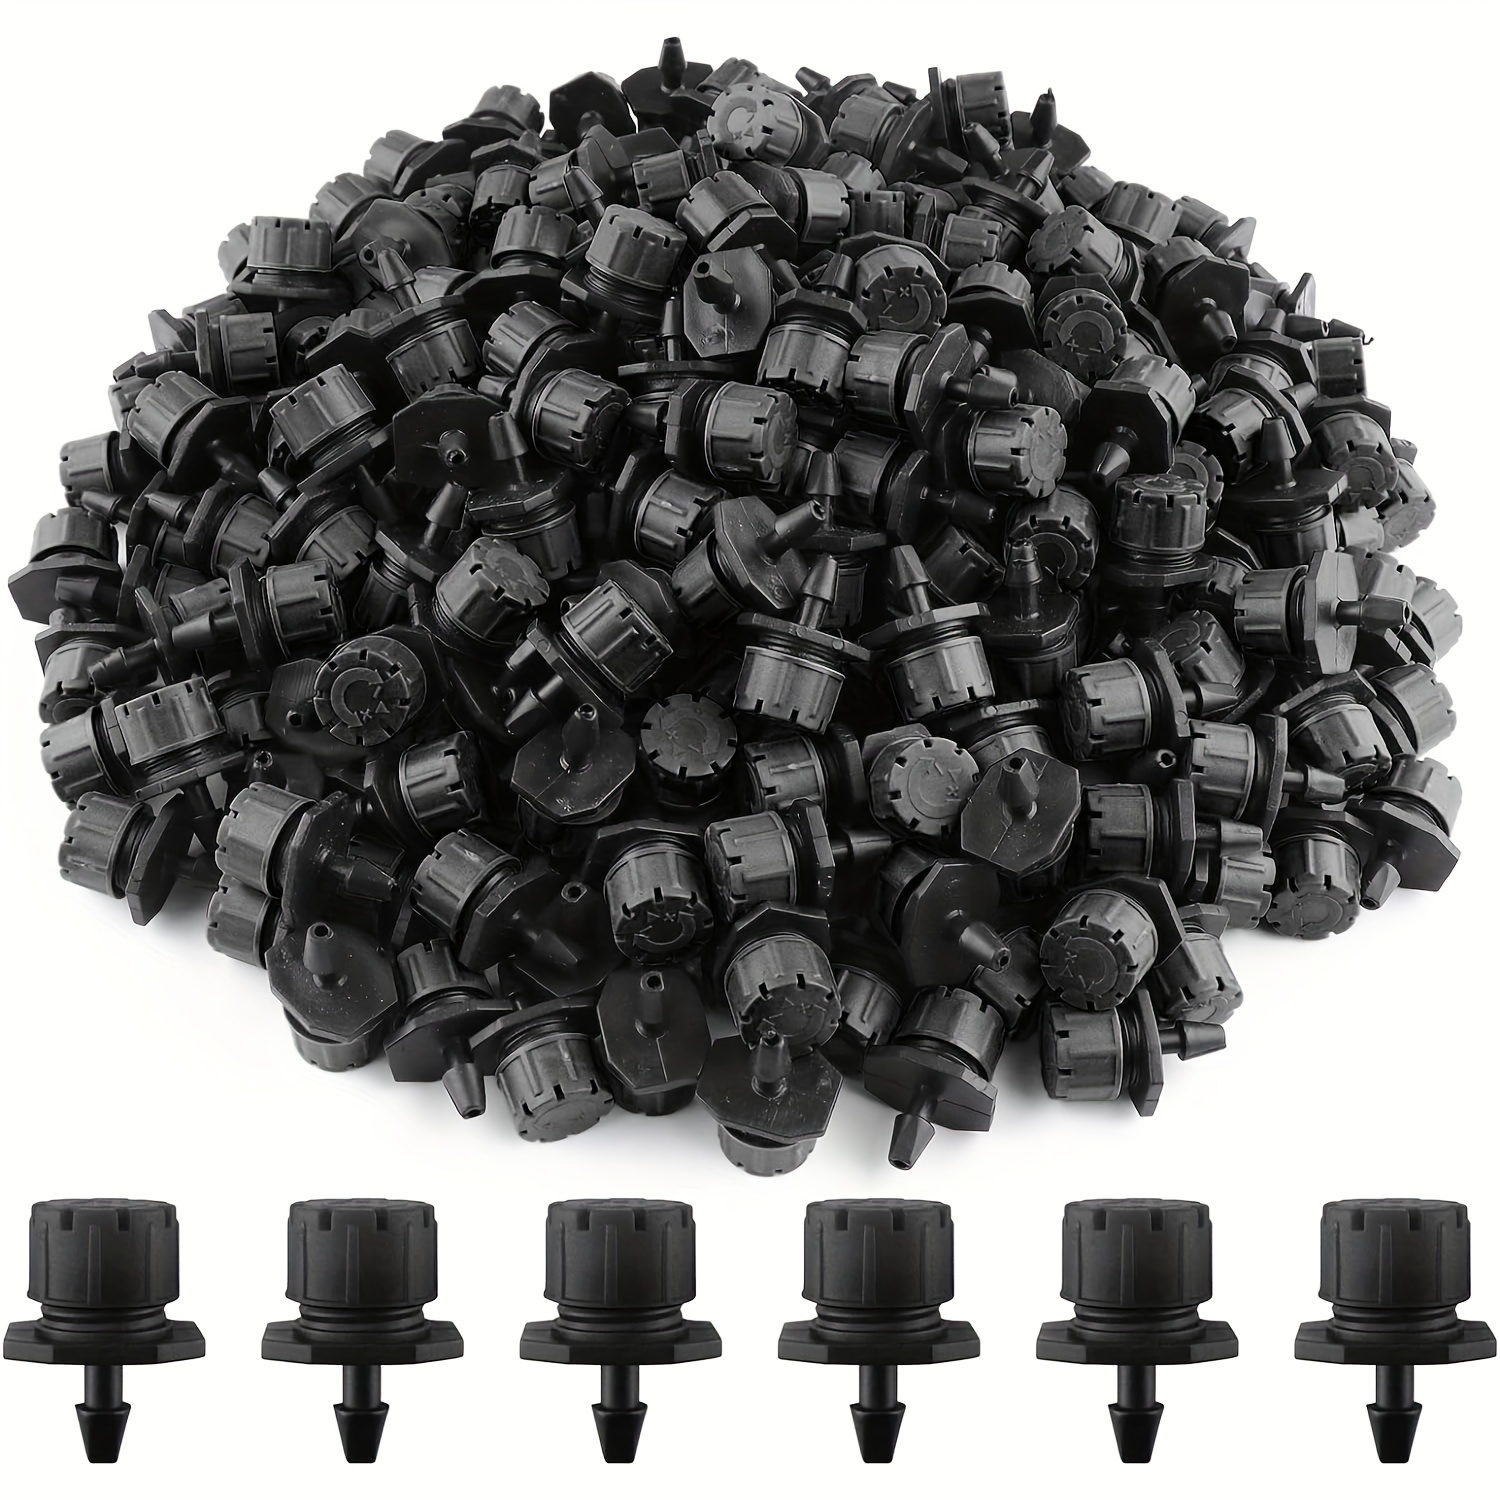 

200pcs Adjustable Drippers, 1/4 Inch Micro Flow Drip Irrigation Heads With Spray Nozzles, Used For Vegetable Gardens Or Flower Beds (black)